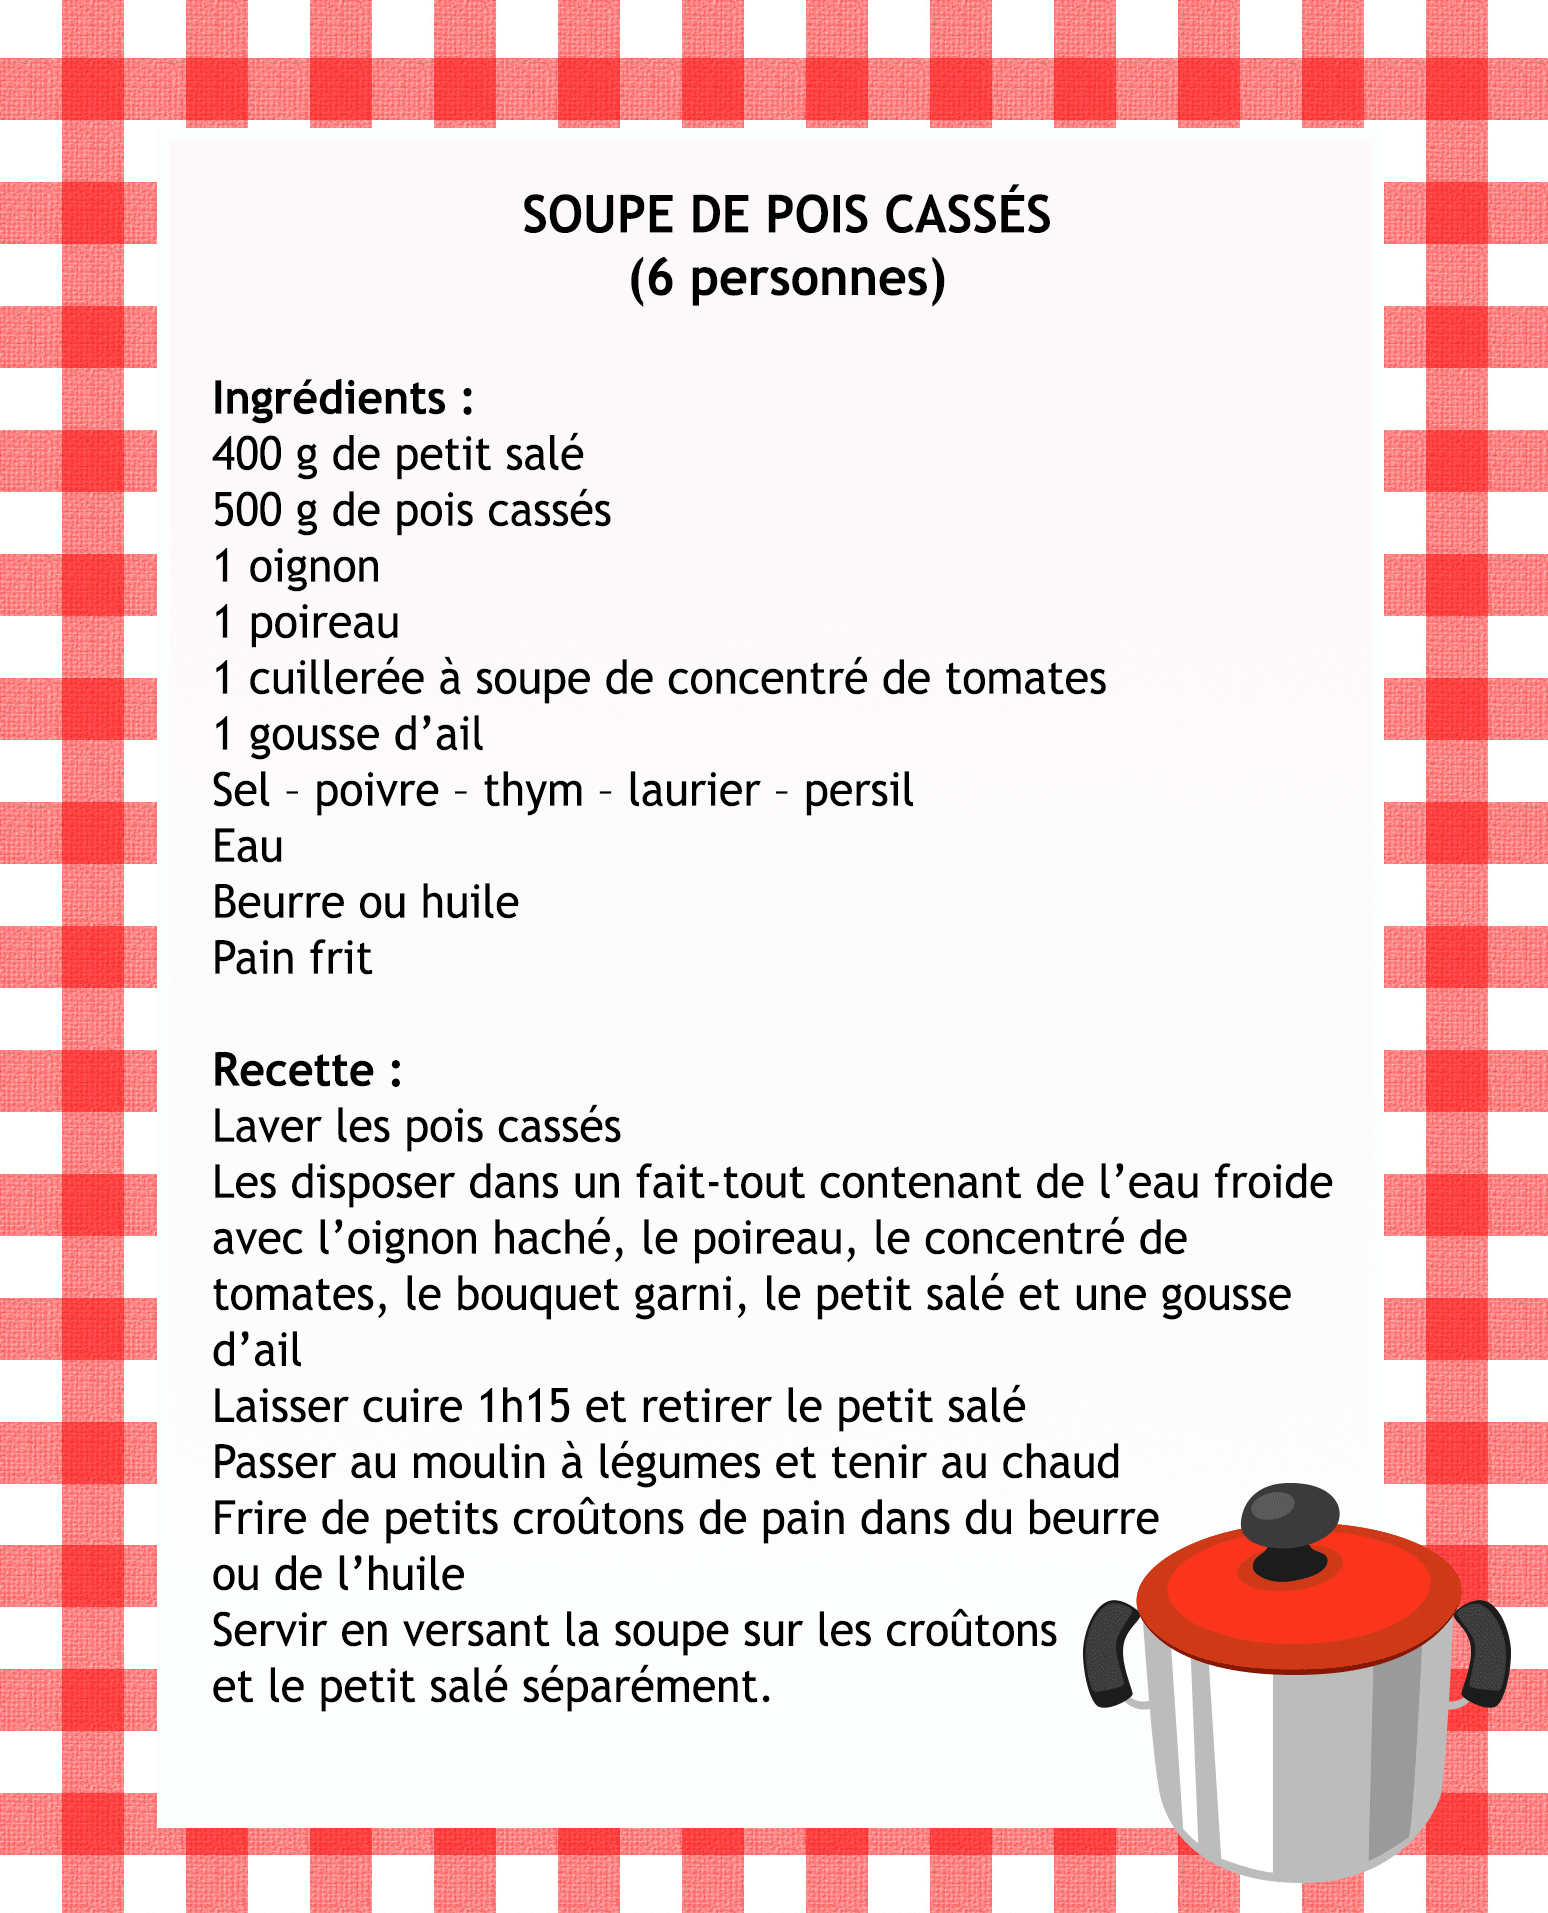 Soupepoiscasses